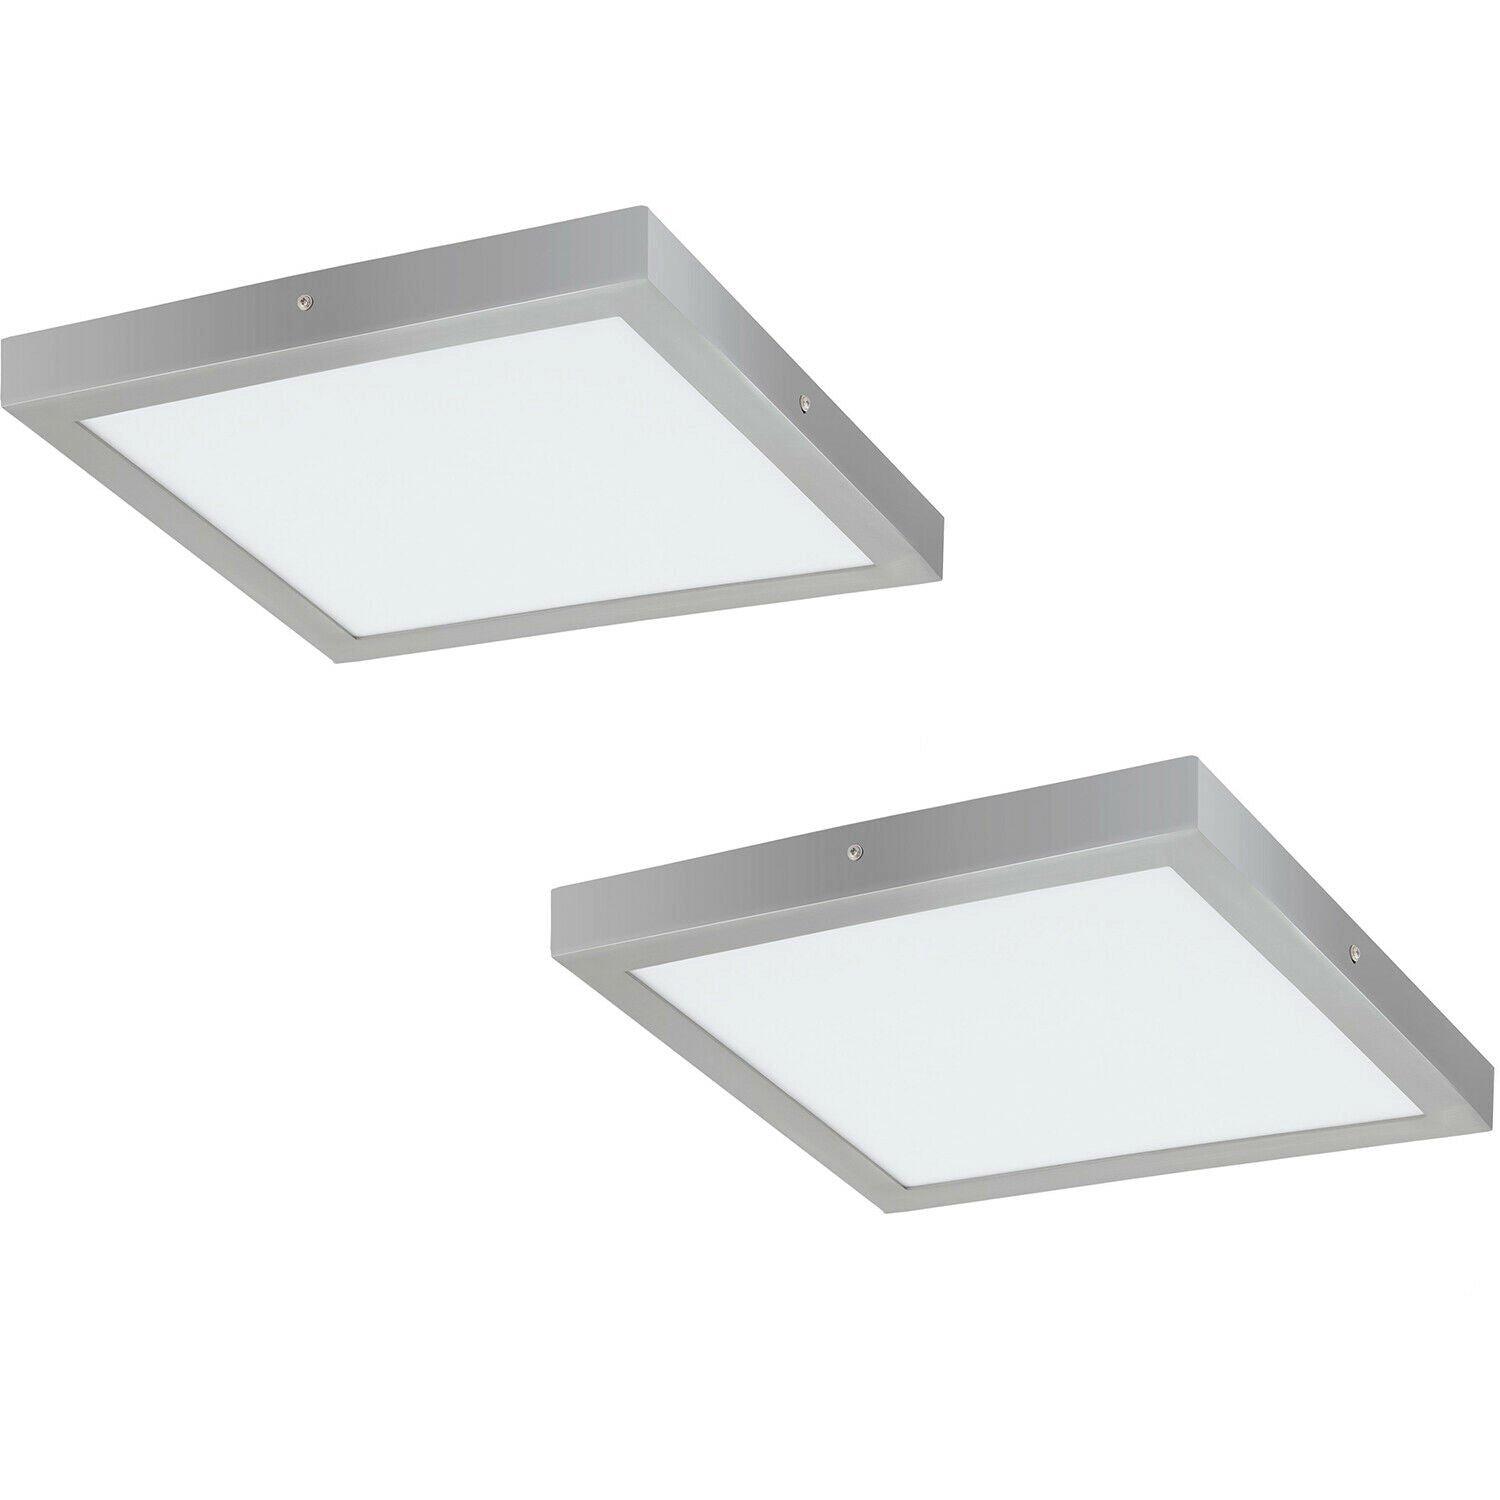 2 PACK Wall / Ceiling Light Silver 400mm Square Surface Mounted 25W LED 4000K